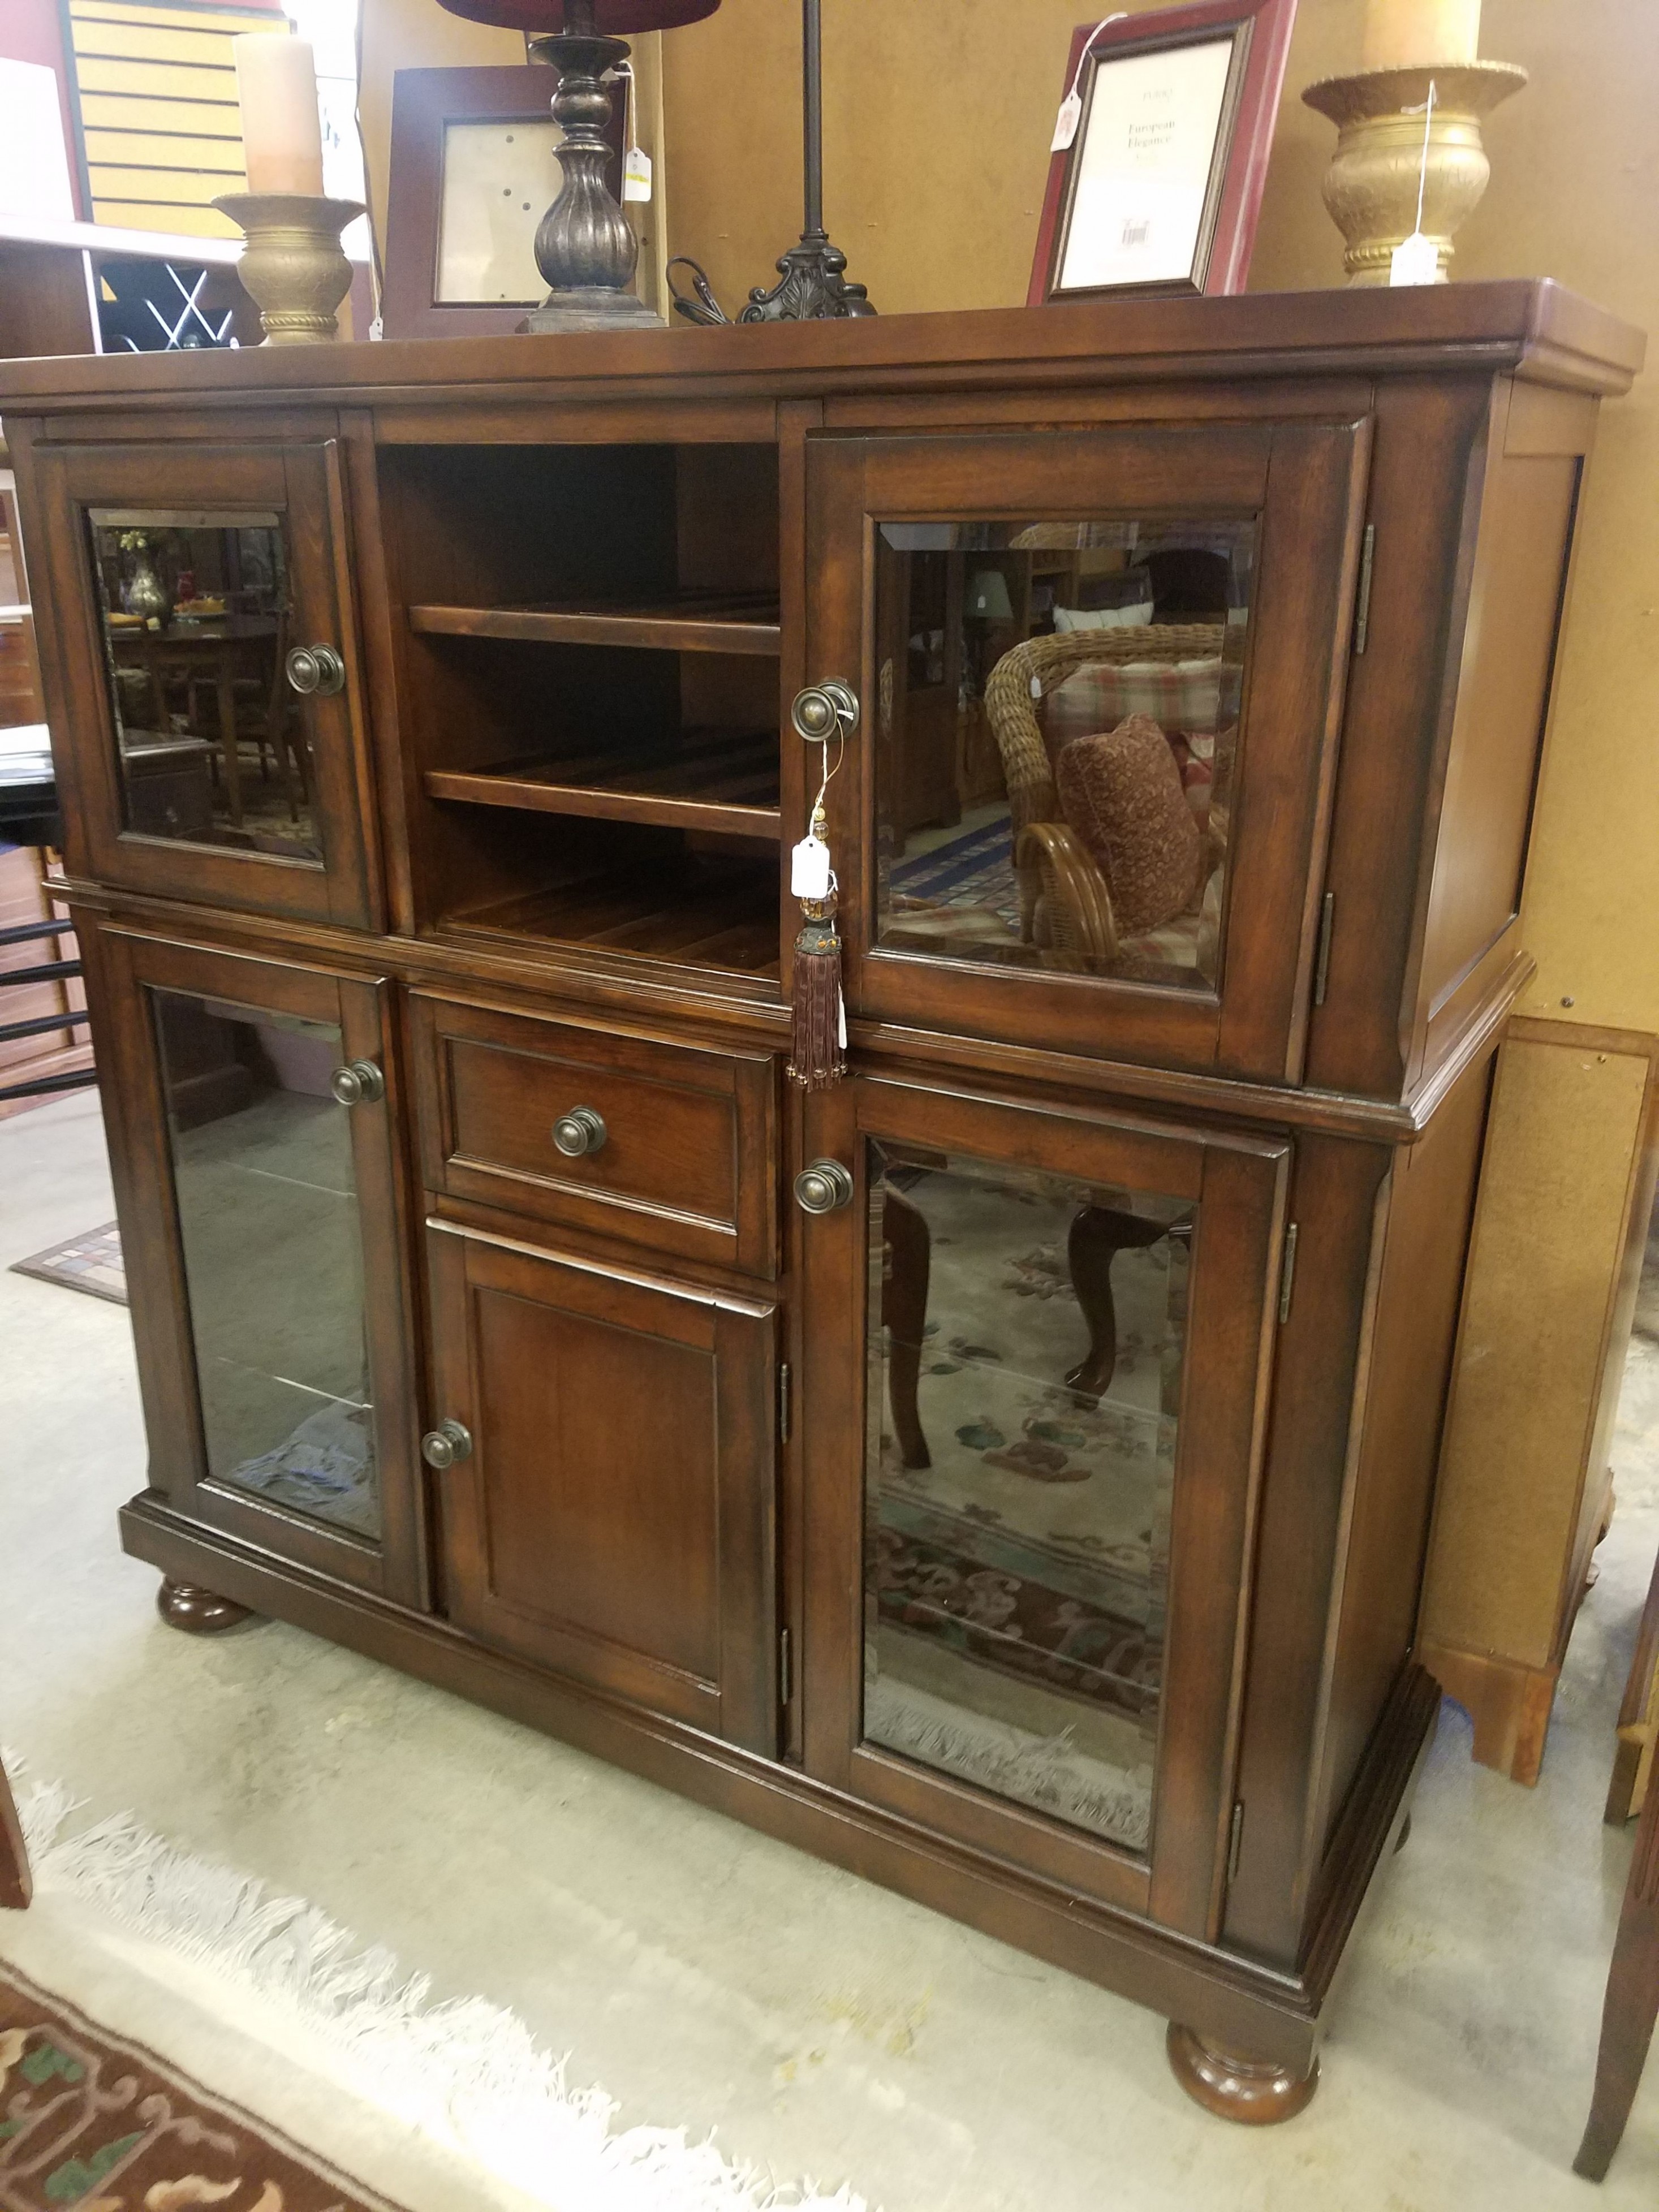 Pin On Furniture Consigned Furniture On Consignment Wichita Ks